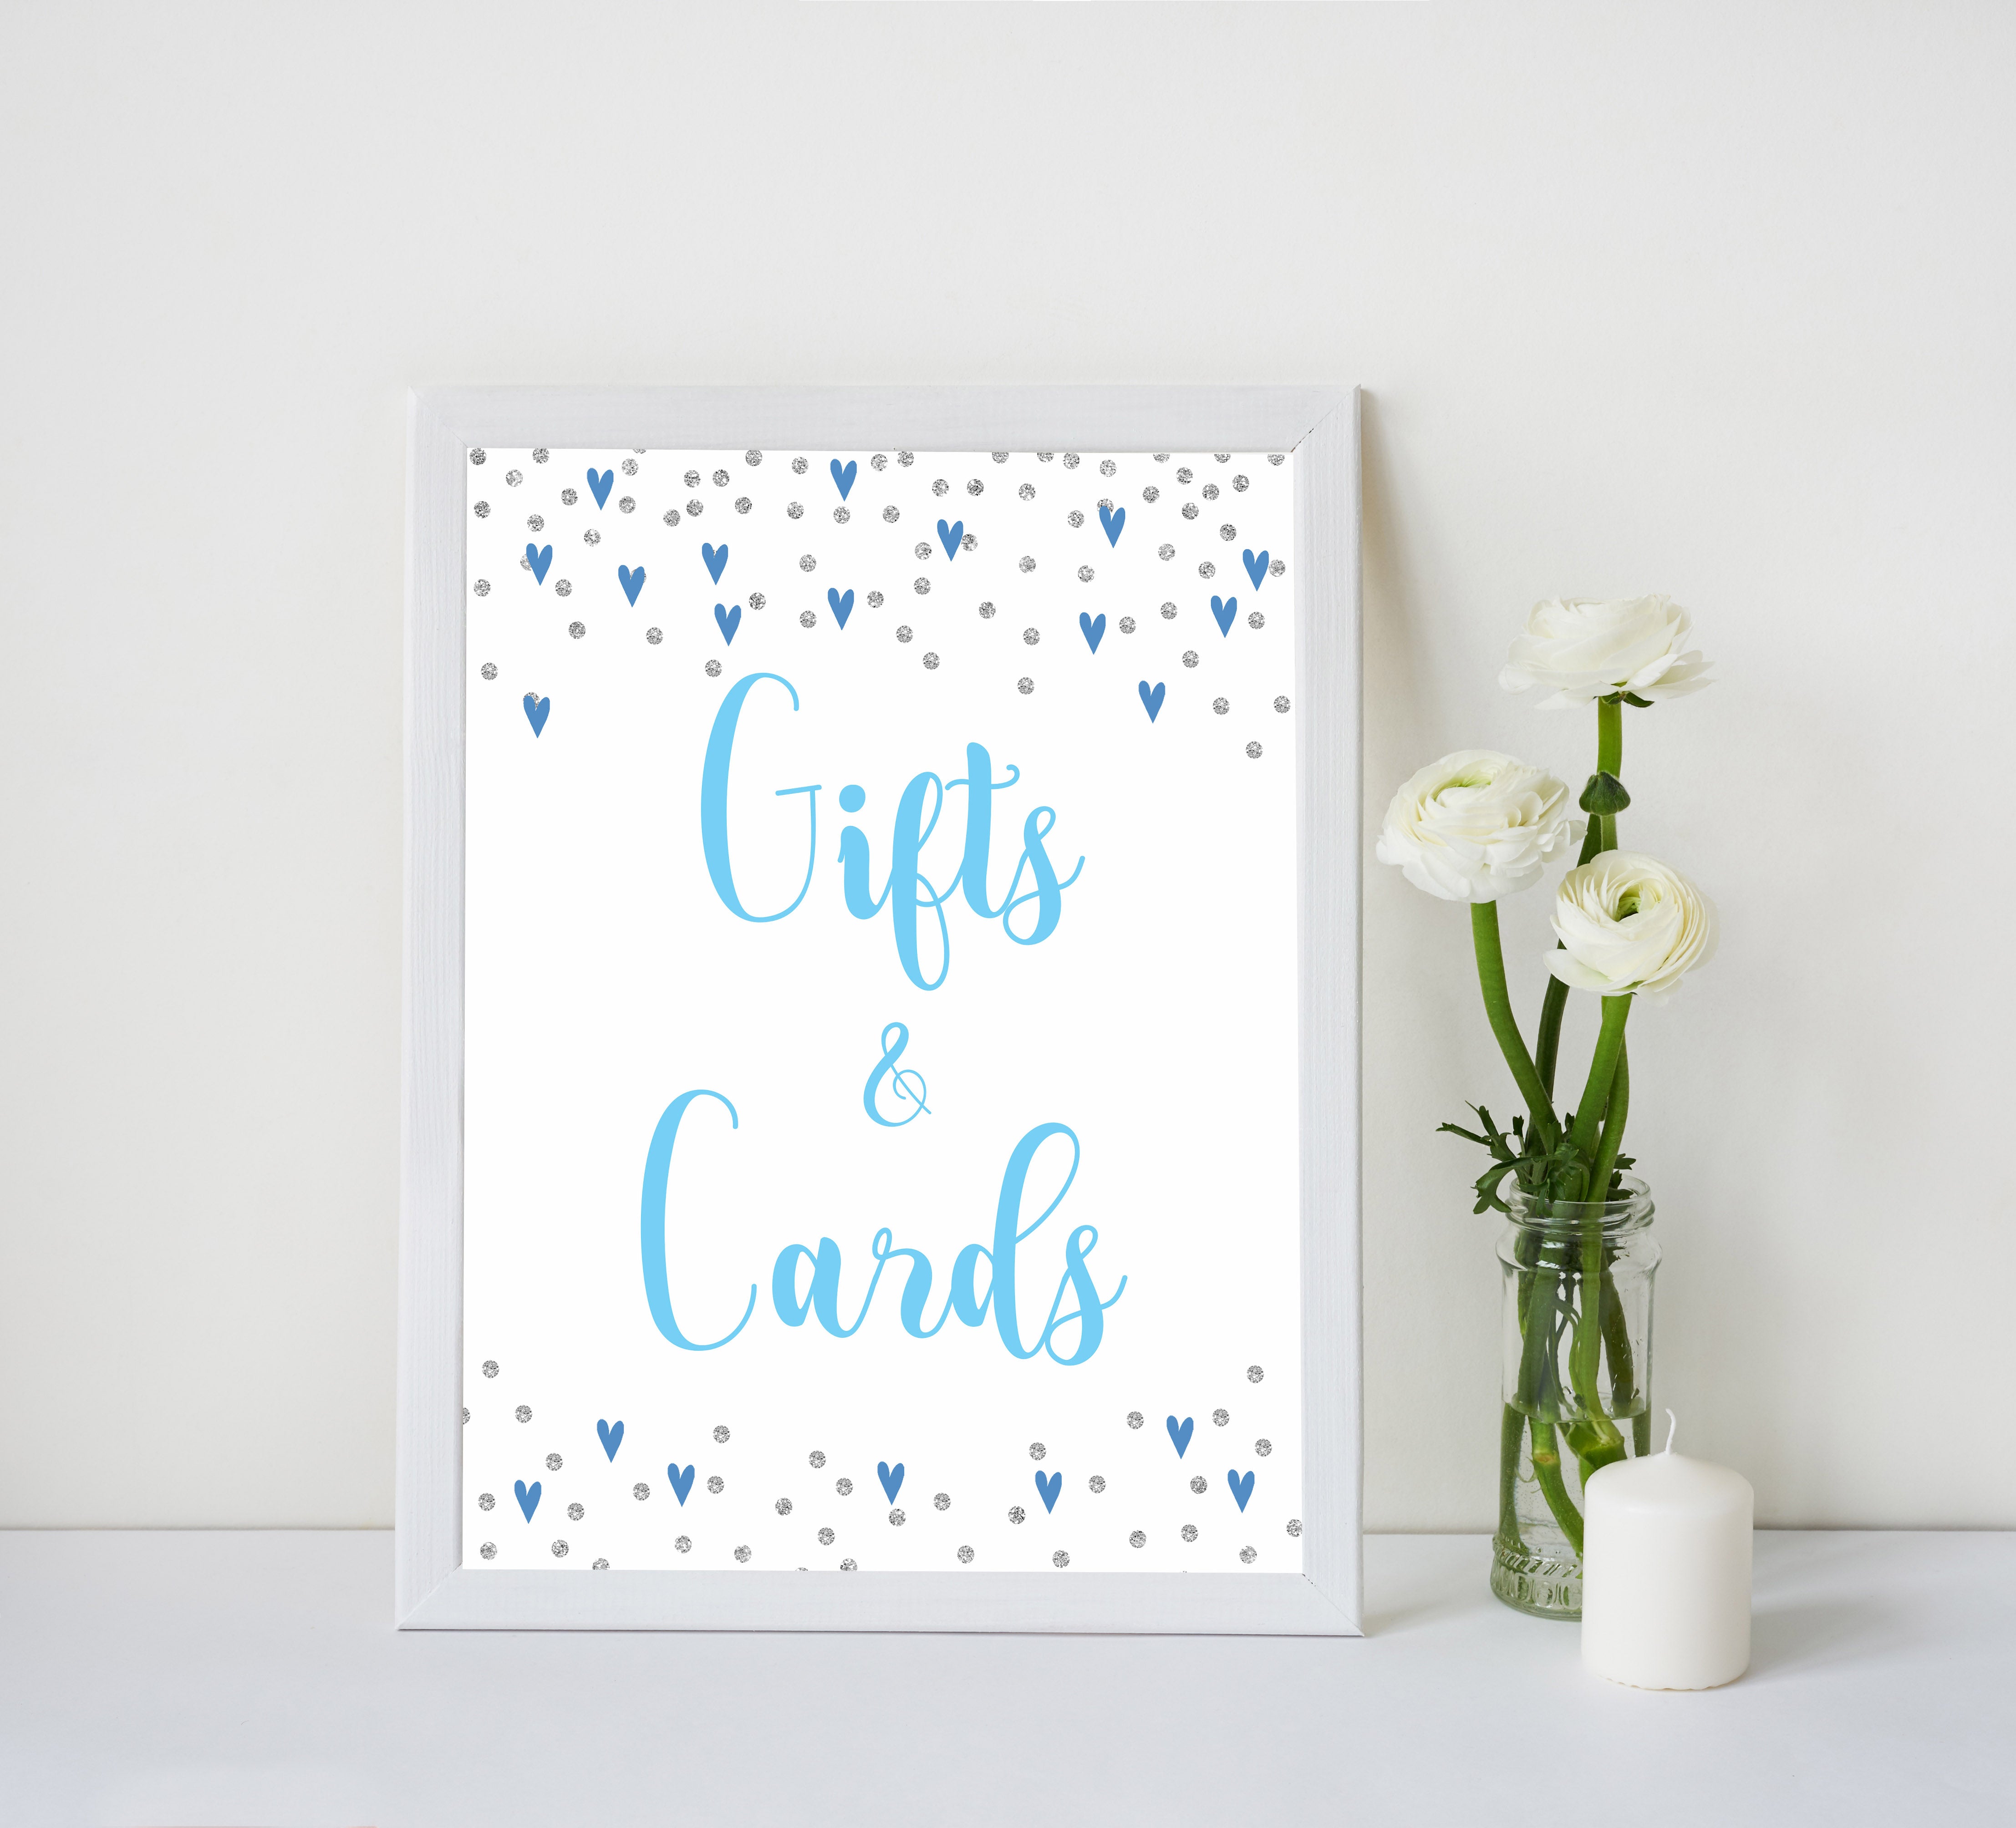 gifts and cards baby table signs, gifts and cards baby sign, Blue hearts baby decor, printable baby table signs, printable baby decor, silver glitter table signs, fun baby signs, blue hearts fun baby table signs